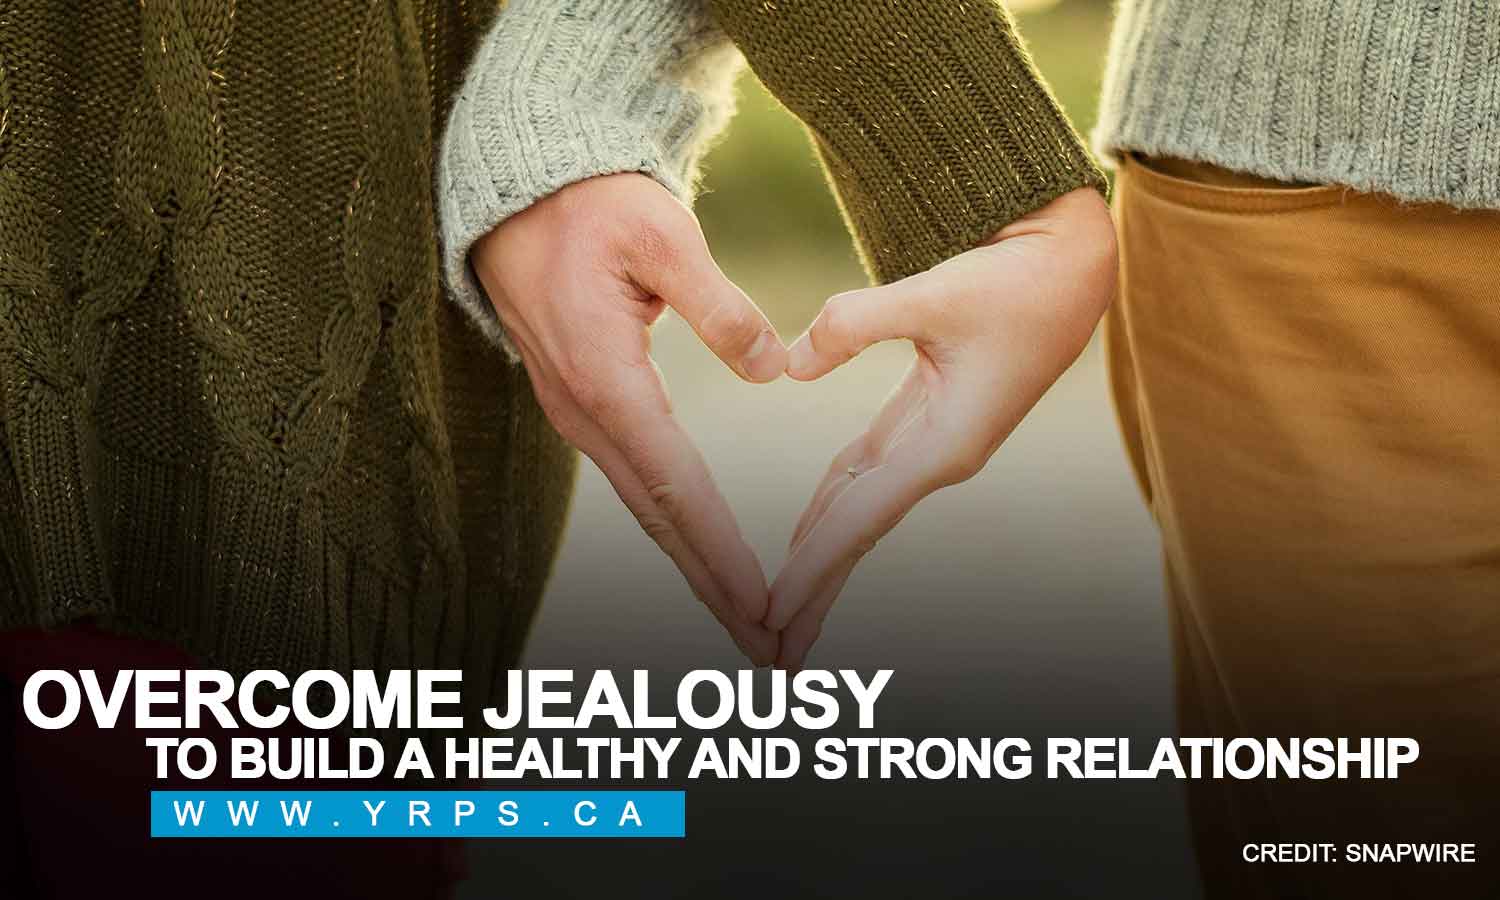 Overcome jealousy to build a healthy and strong relationship